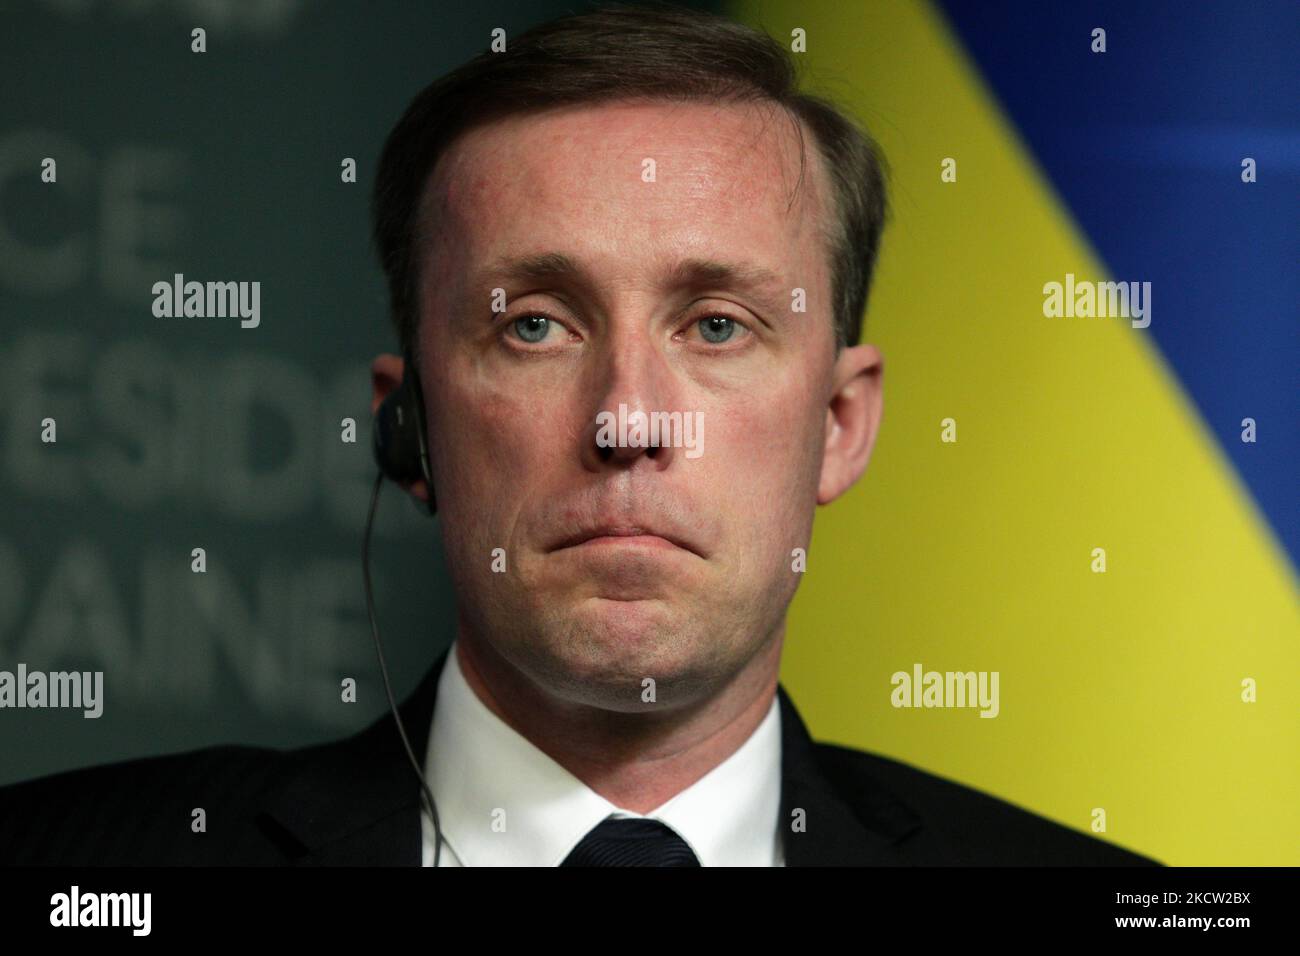 Non Exclusive: KYIV, UKRAINE - NOVEMBER 4, 2022 - National Security Advisor to the President of the United States Jake Sullivan attends a joint briefi Stock Photo